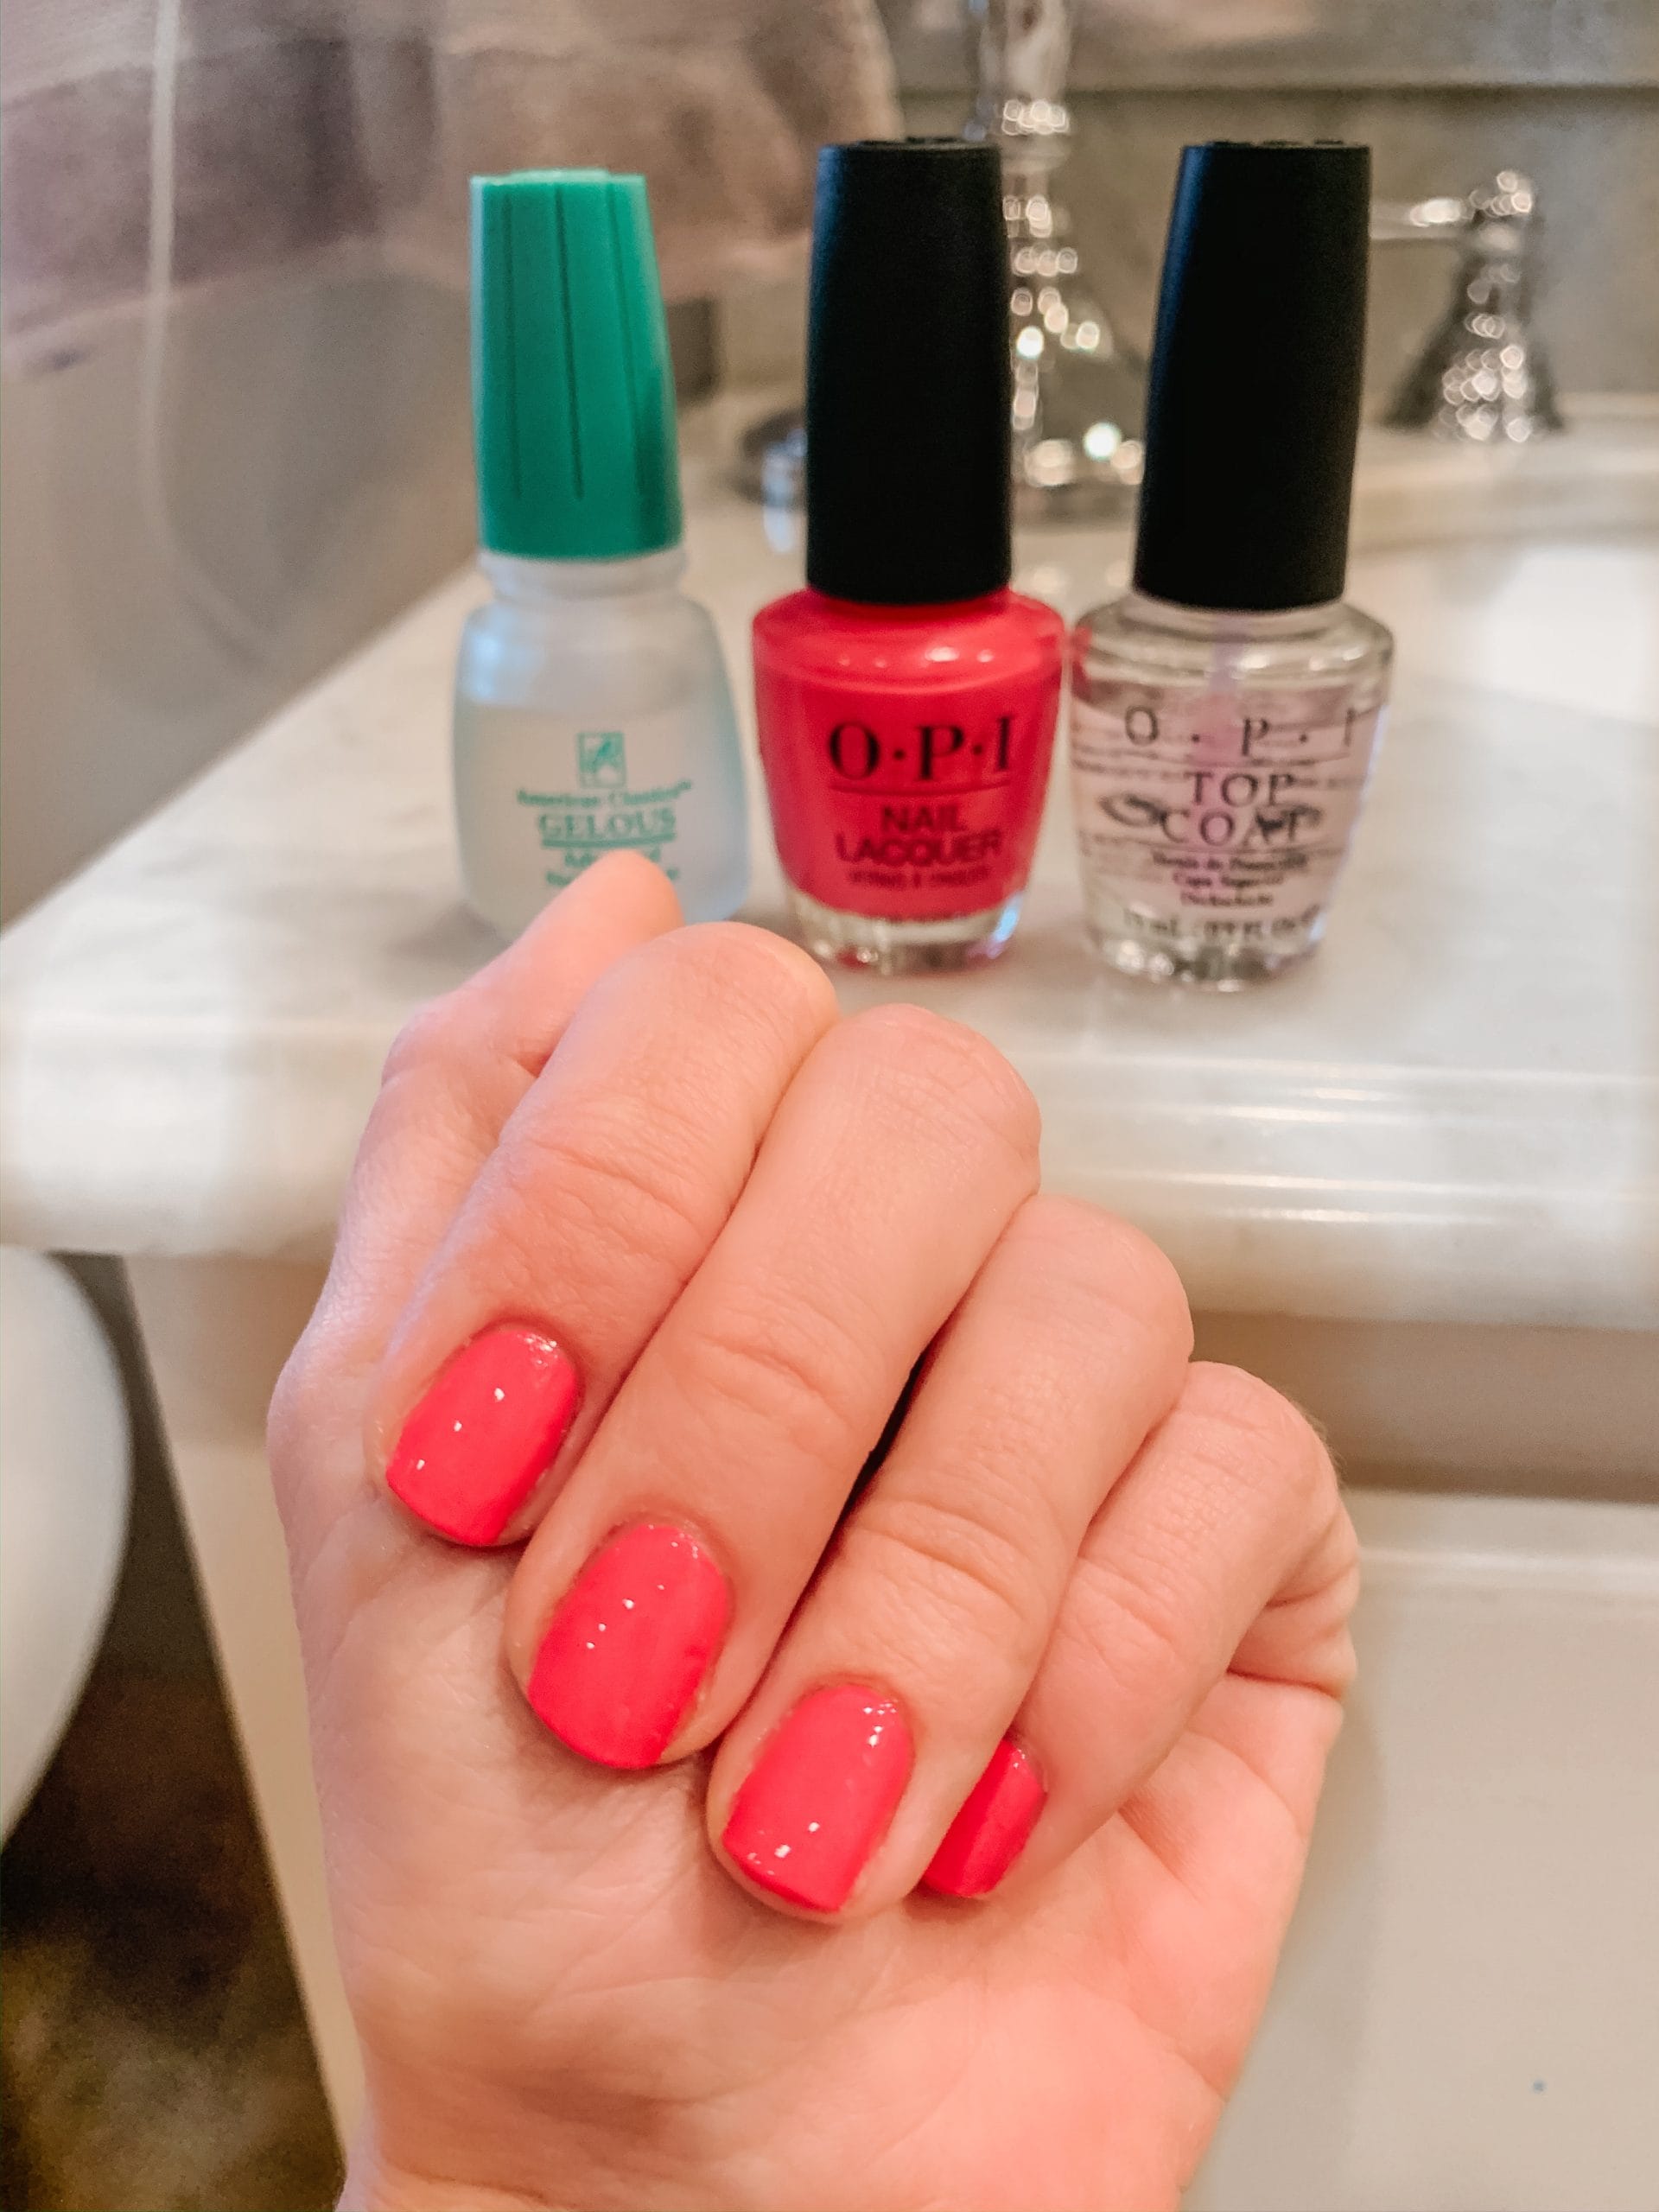 What can you do to get gel nail polish dry without an UV light? - Quora